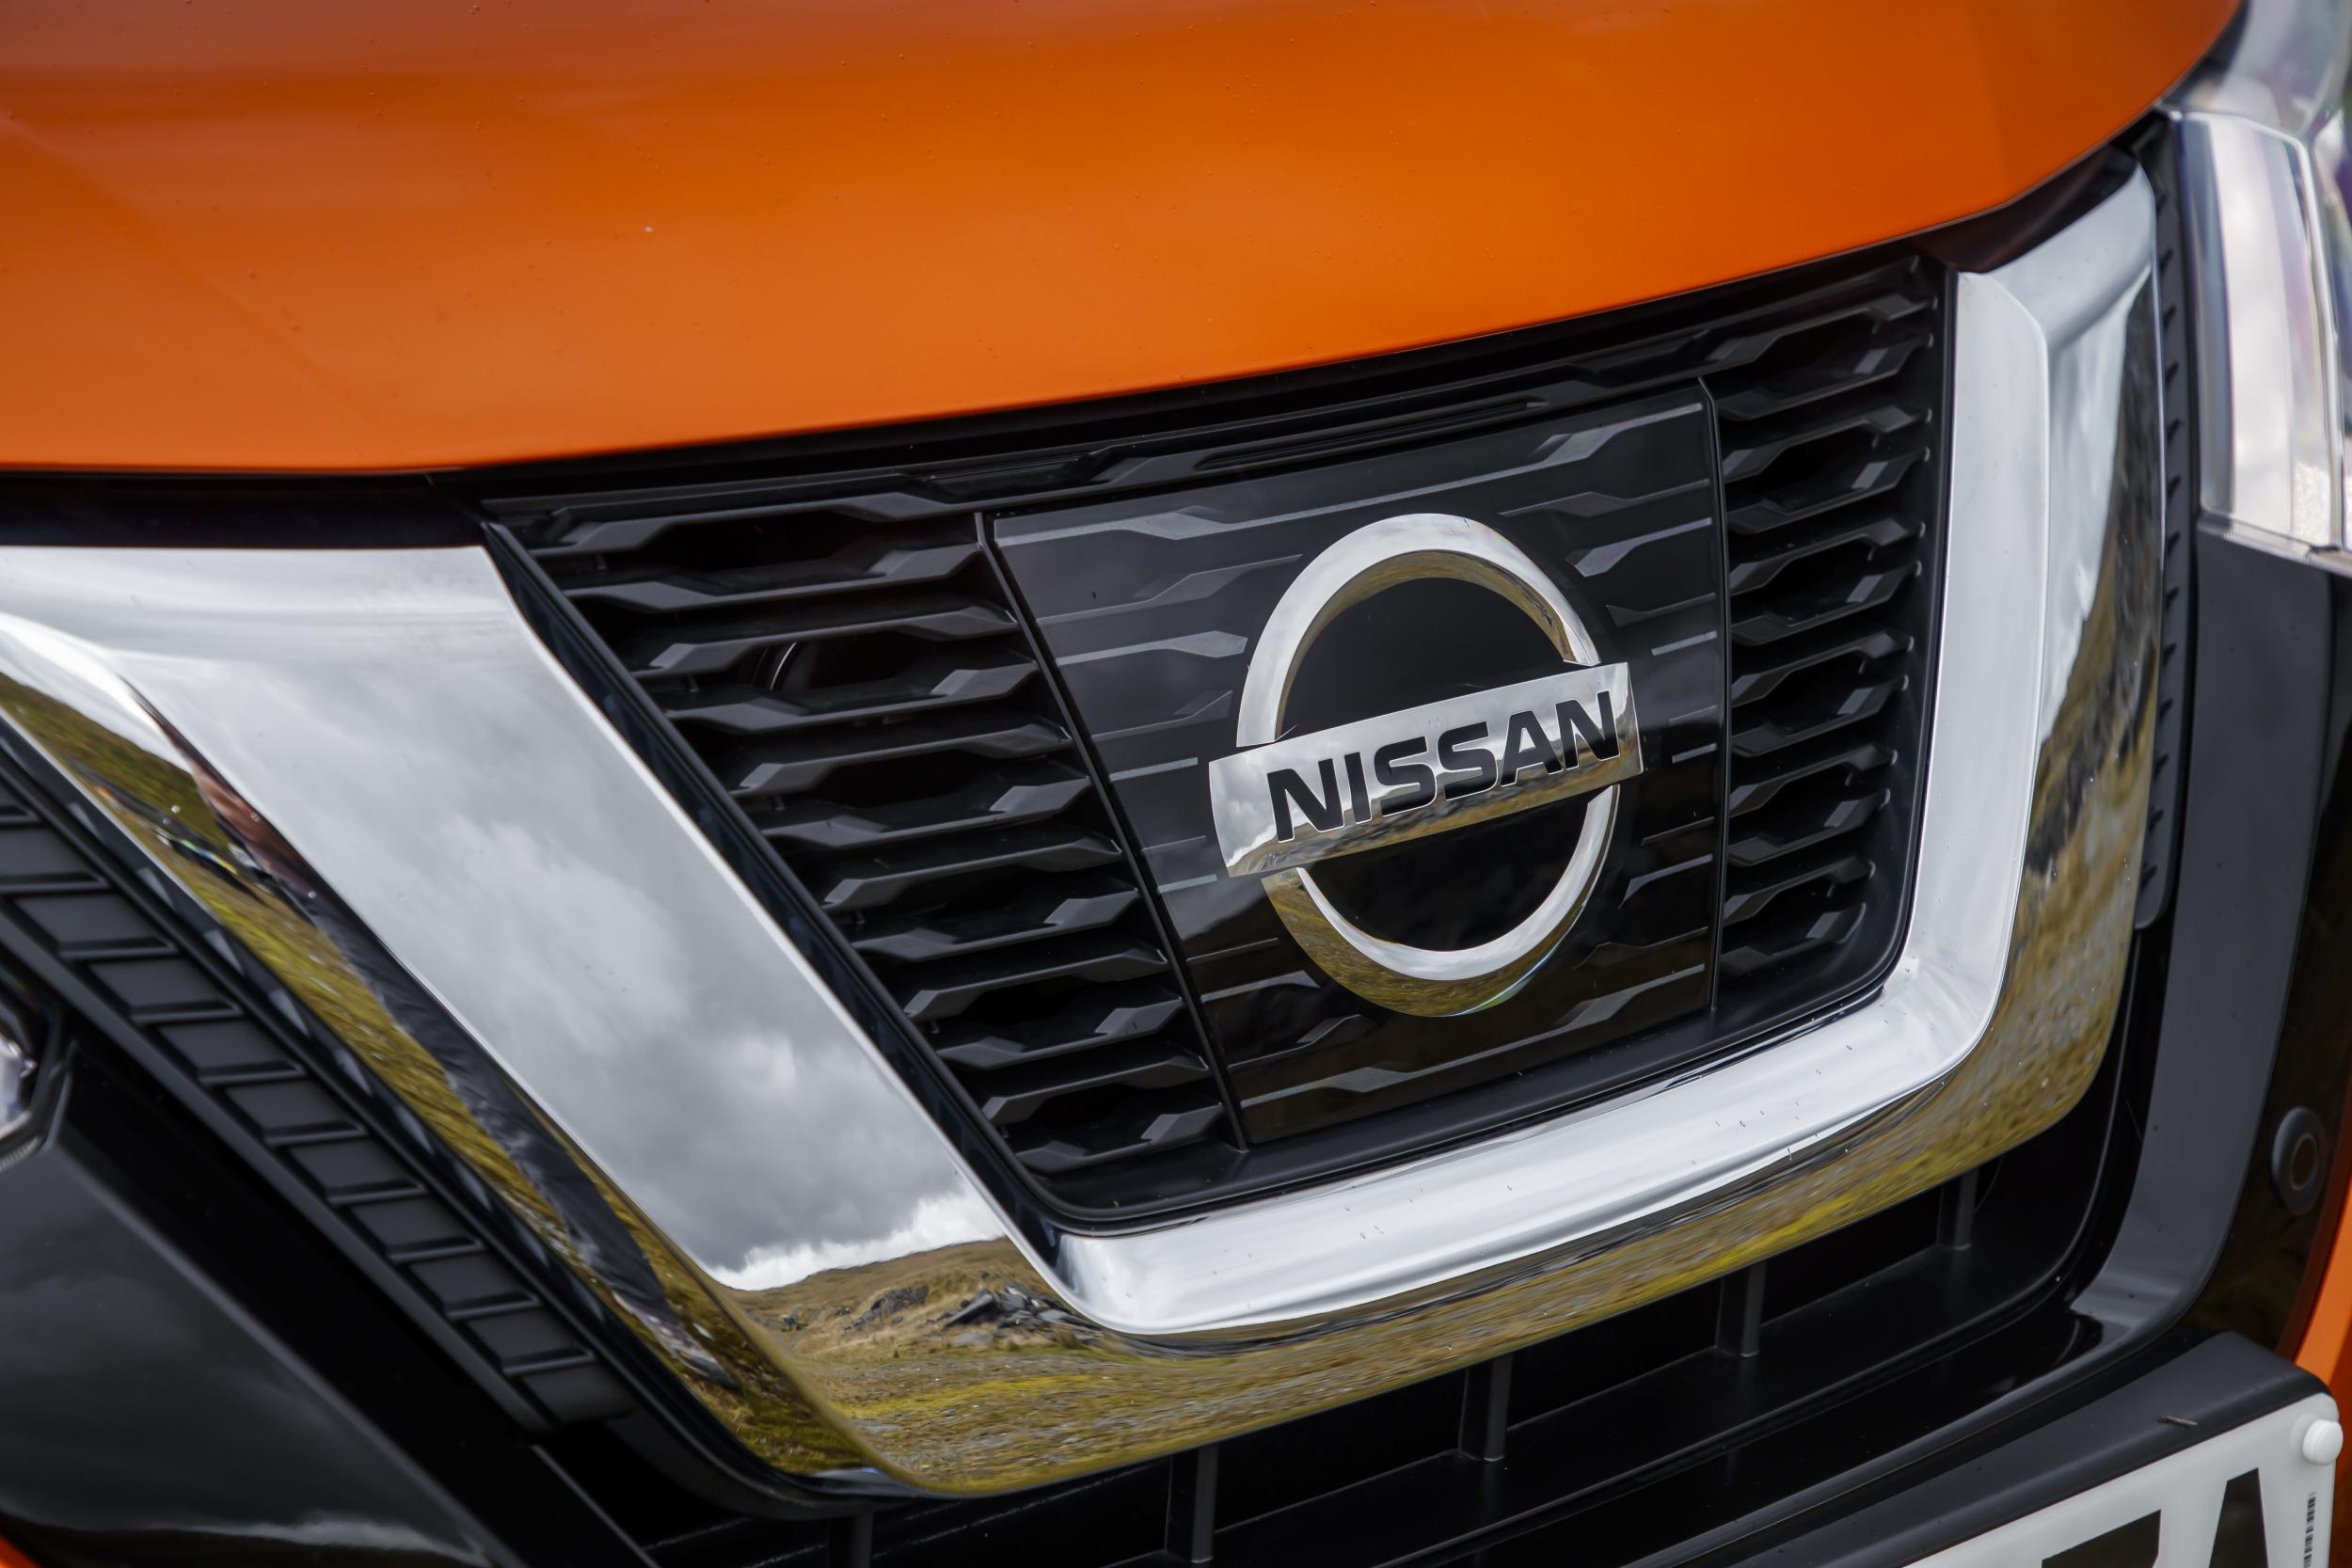 'Nissan regrets any inconvenience and concern this has caused to its valued customers in Japan' the carmaker said